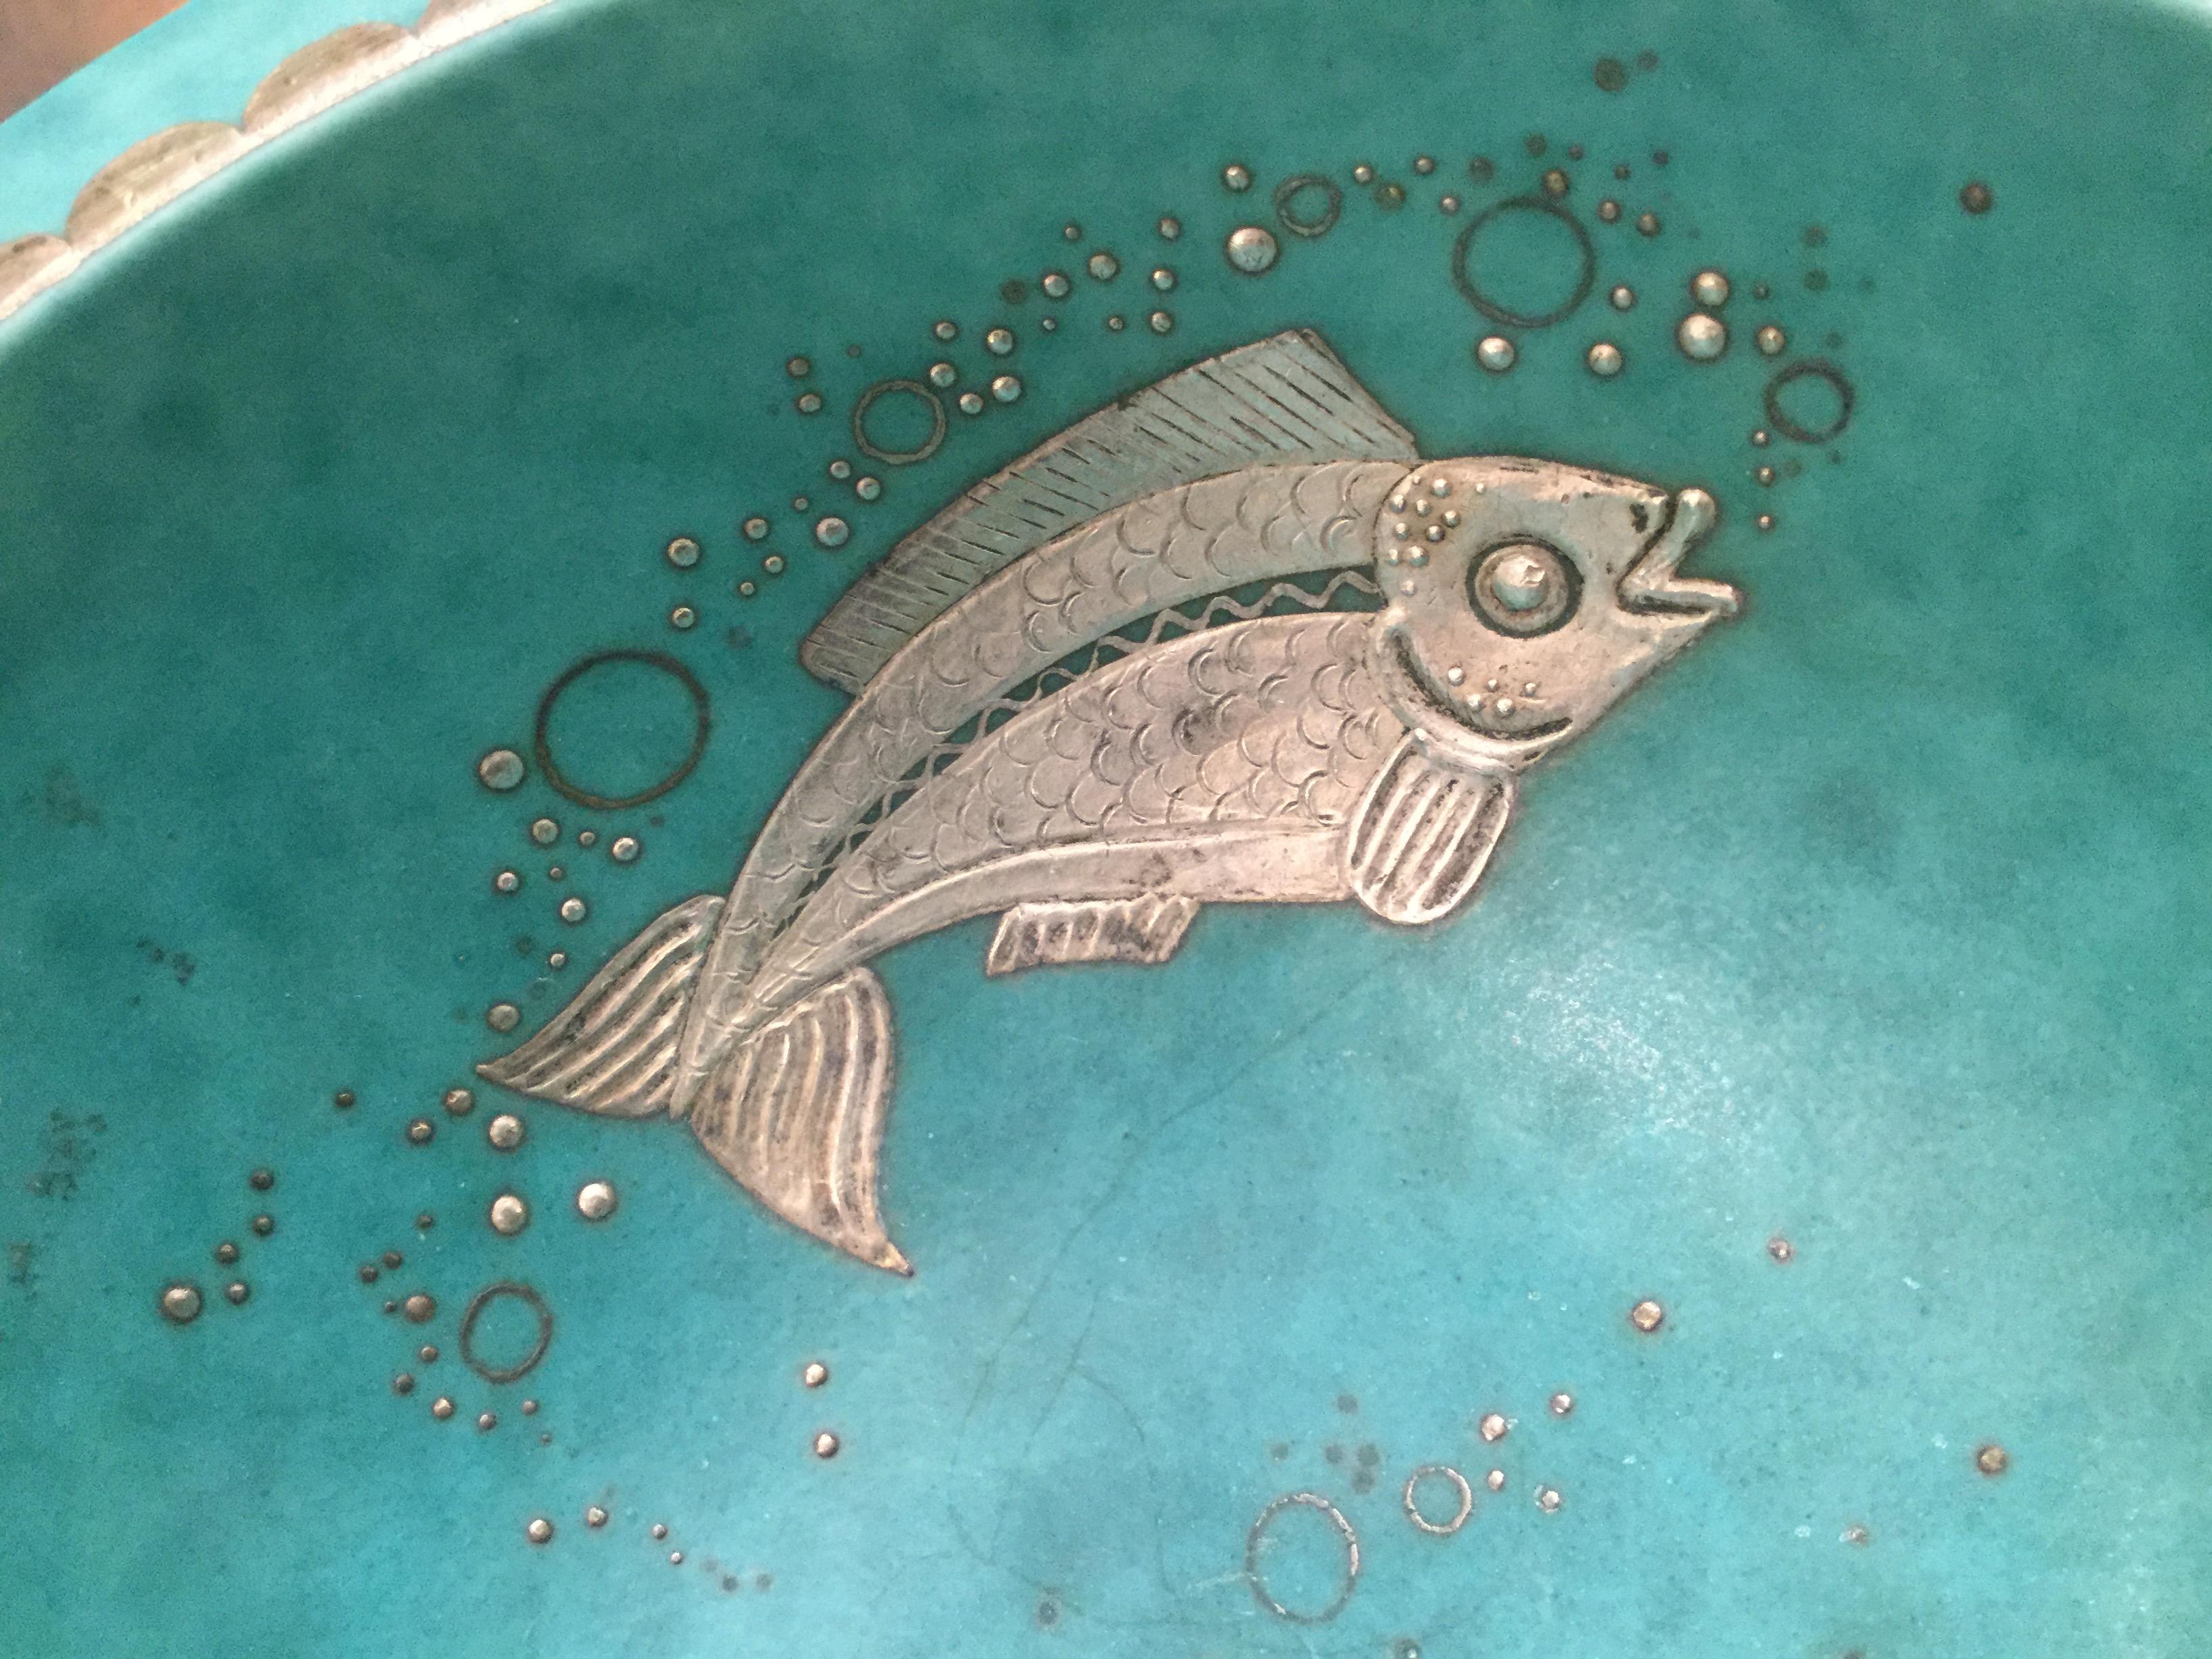 Stoneware bowl with an Evergreen glaze, the inside decorated with a silver fish and bubbles. Silver contributed by Argenta.